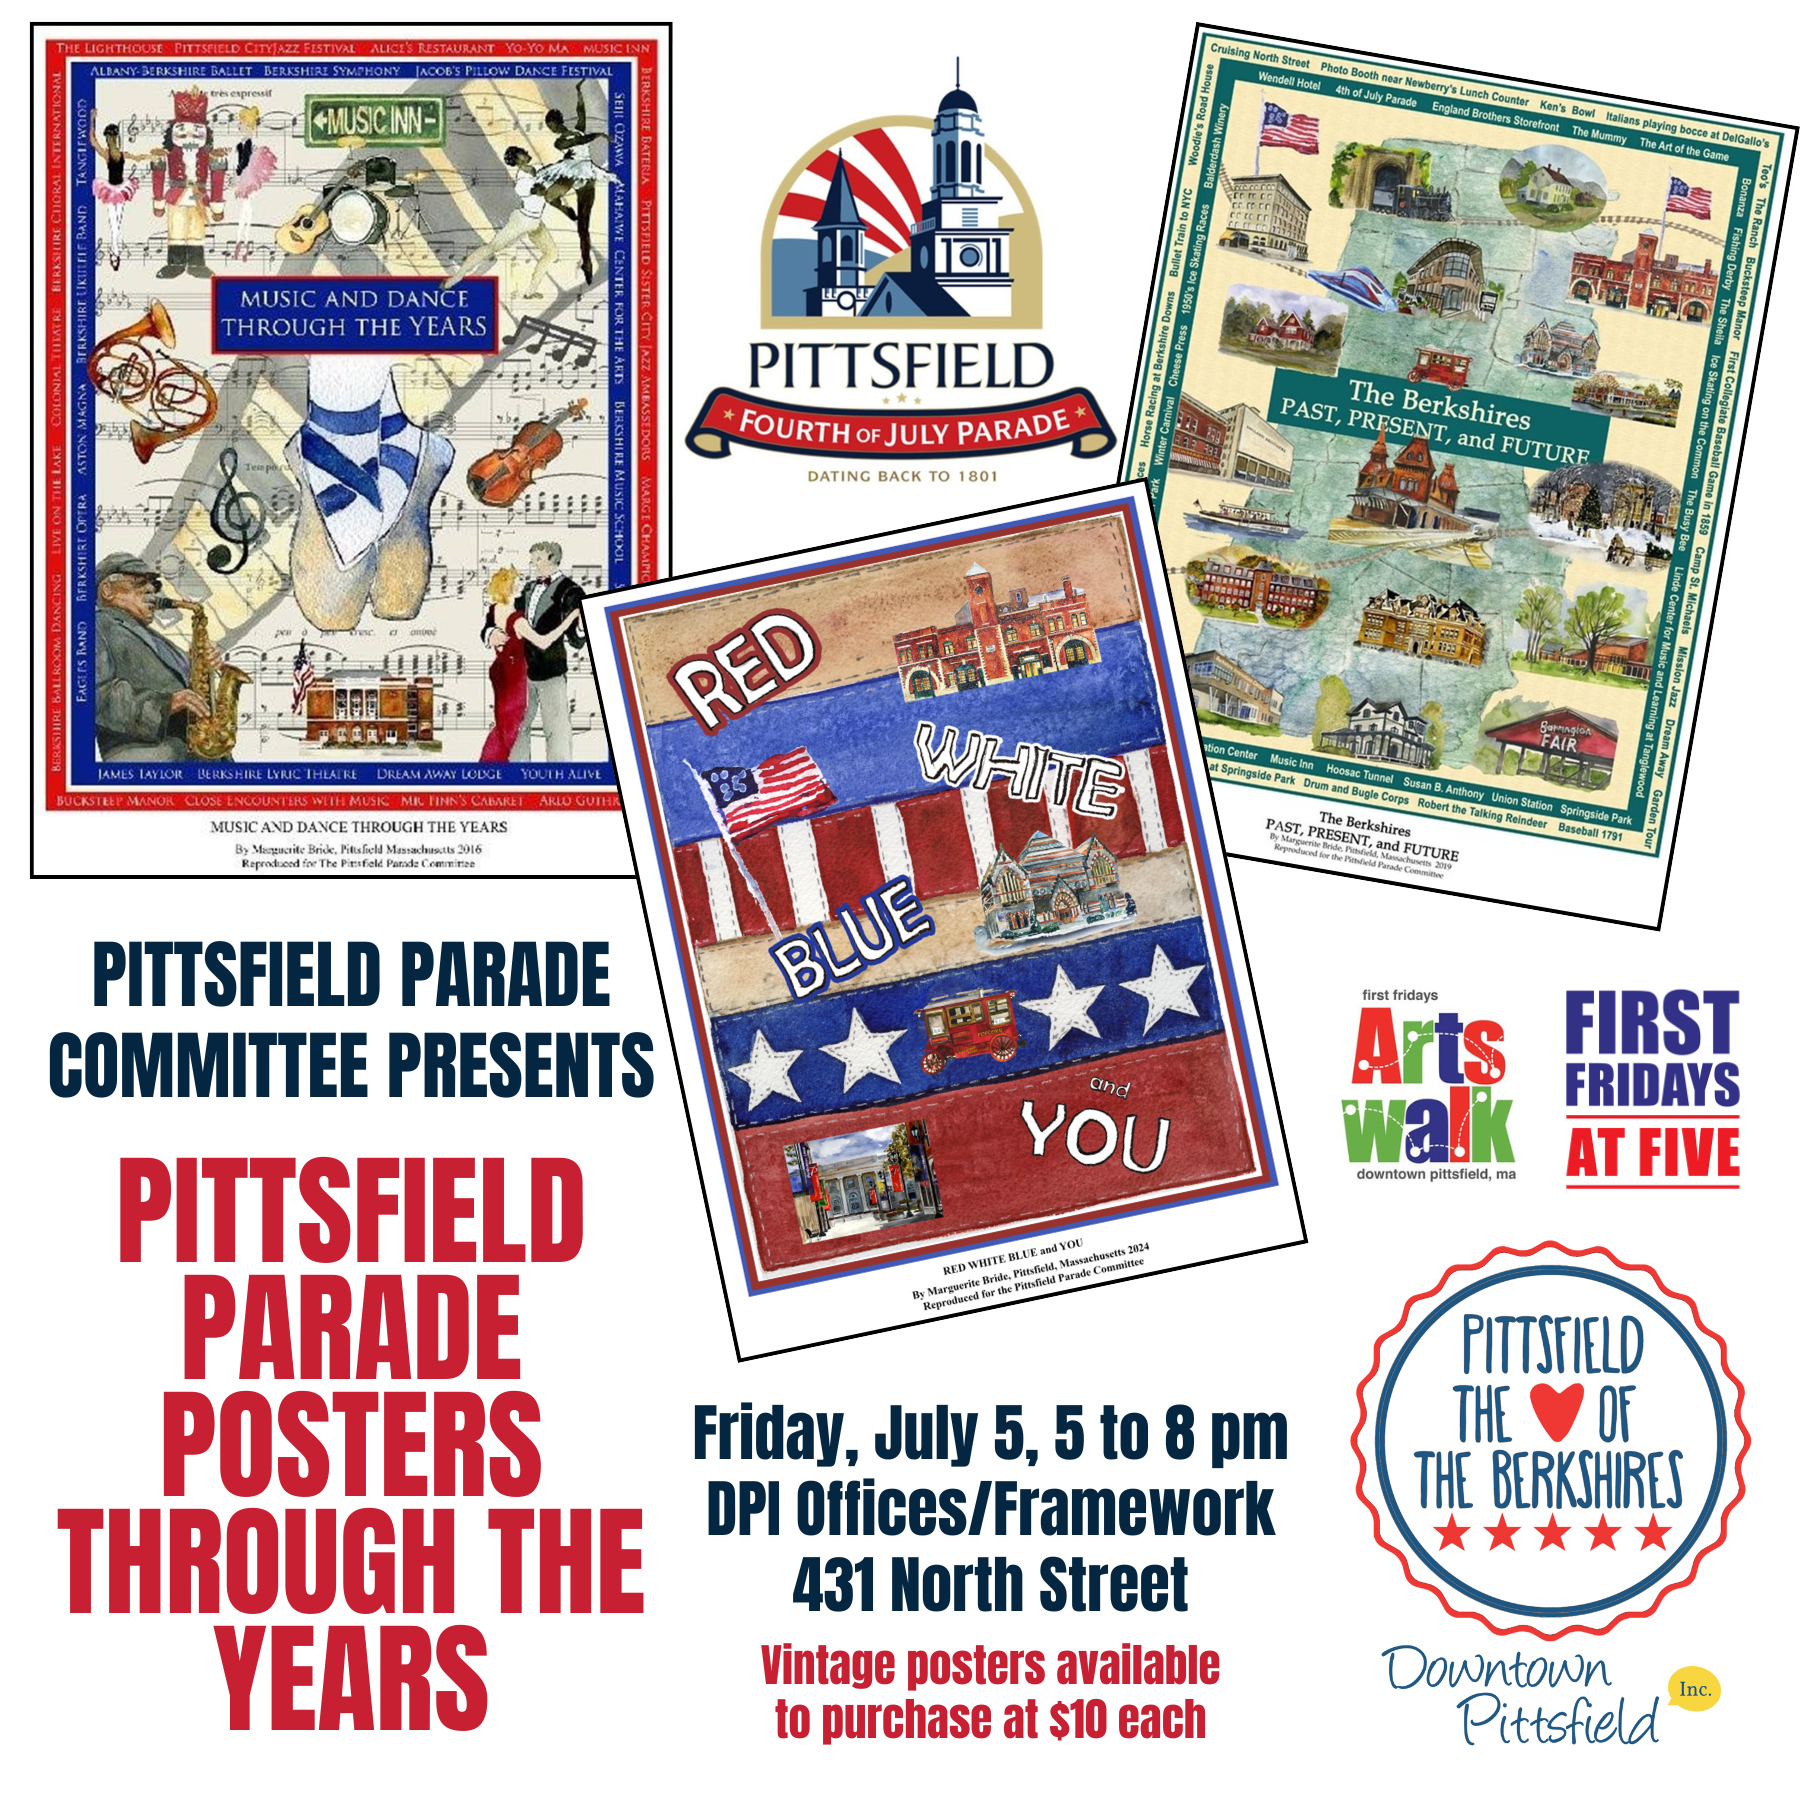 “Pittsfield Parade Posters Through The Years”